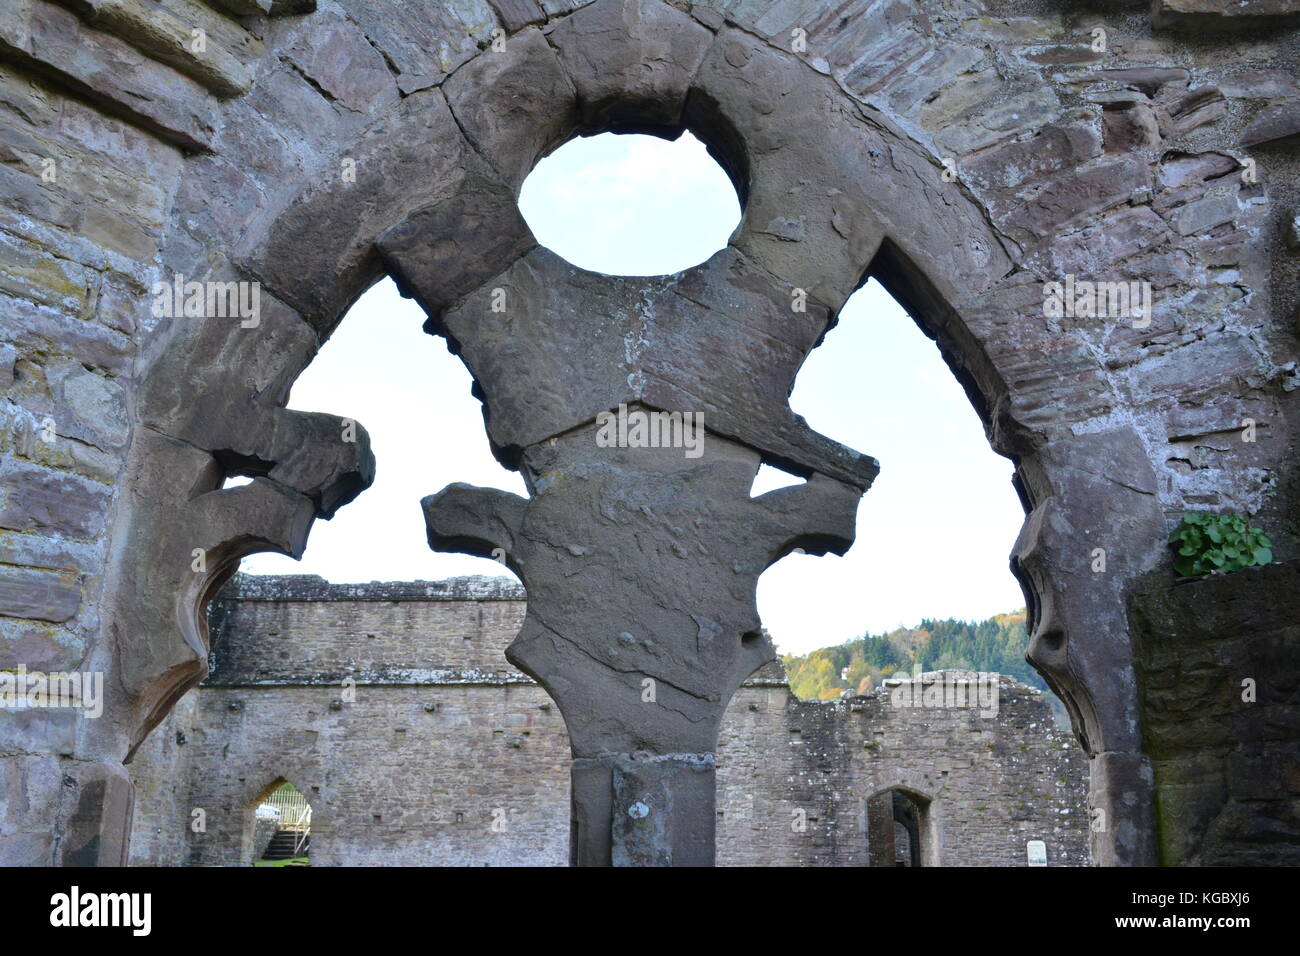 Tintern Abbey Monmouthshire UK Wales re monastries dissolution architectural detail ancient ruins Stock Photo